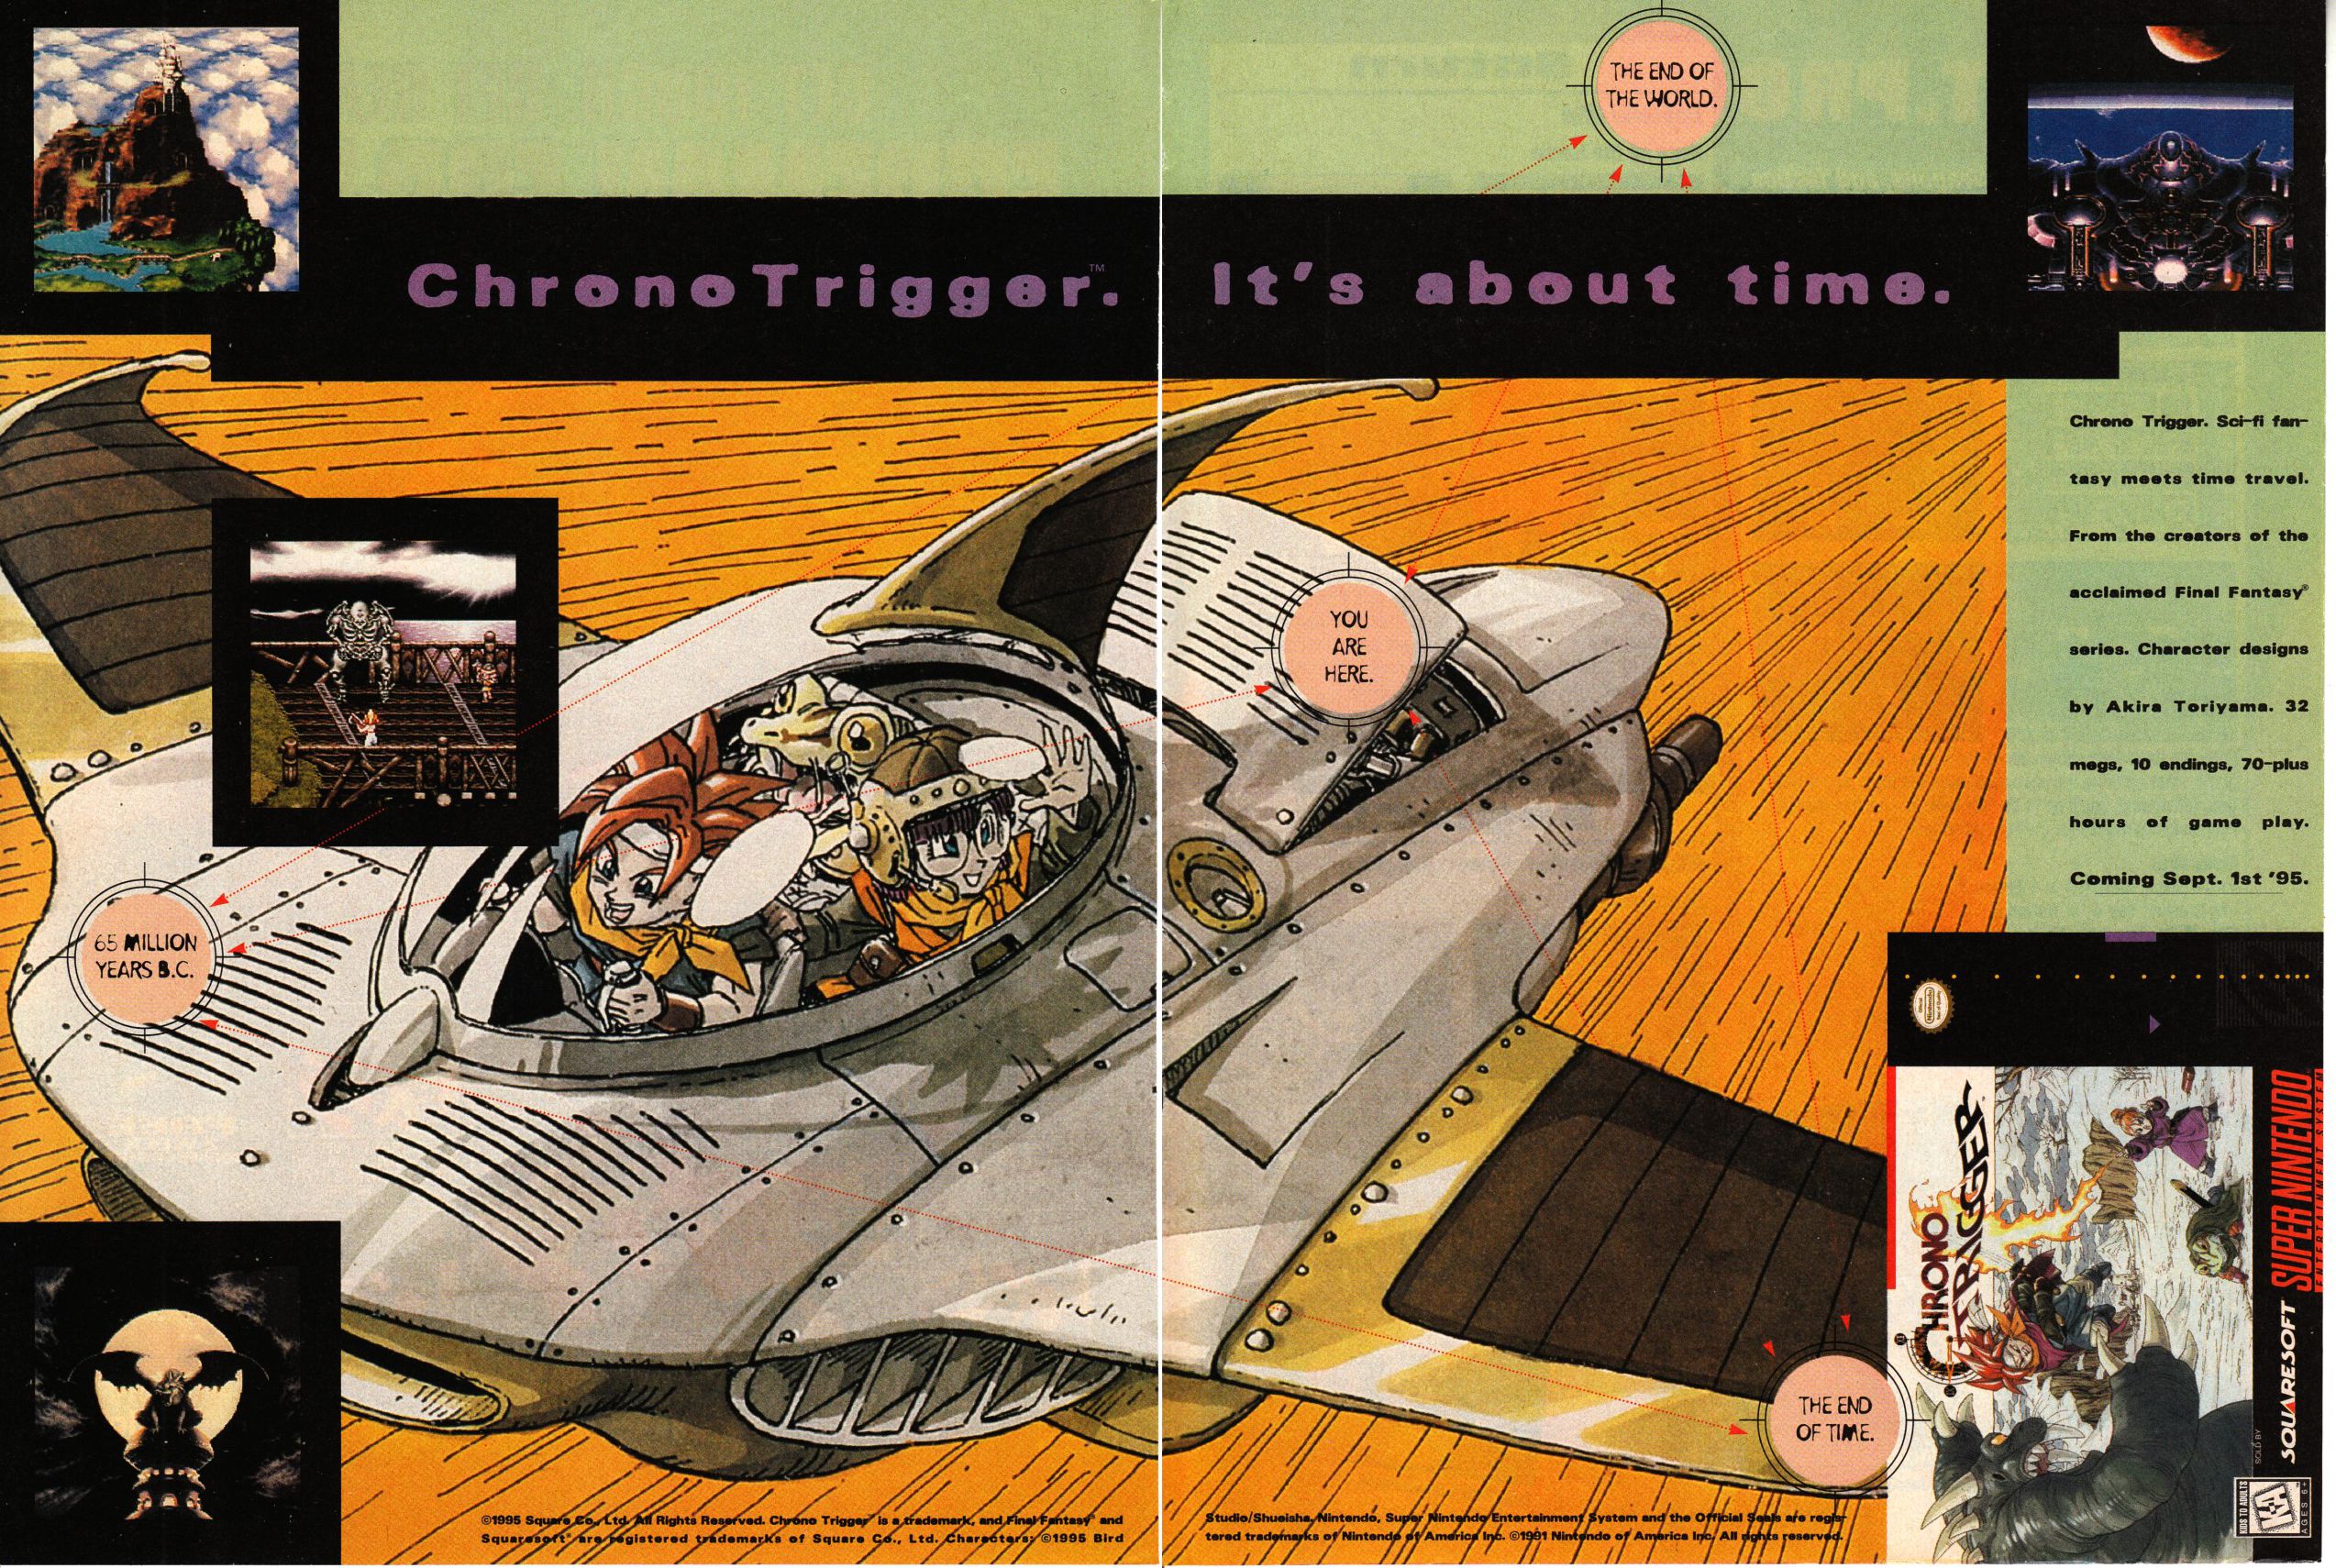 From a time when Squaresoft was at the top of their game. Chrono Trigger is an RPG with a distinct focus on time travel. The game was a big hit […]